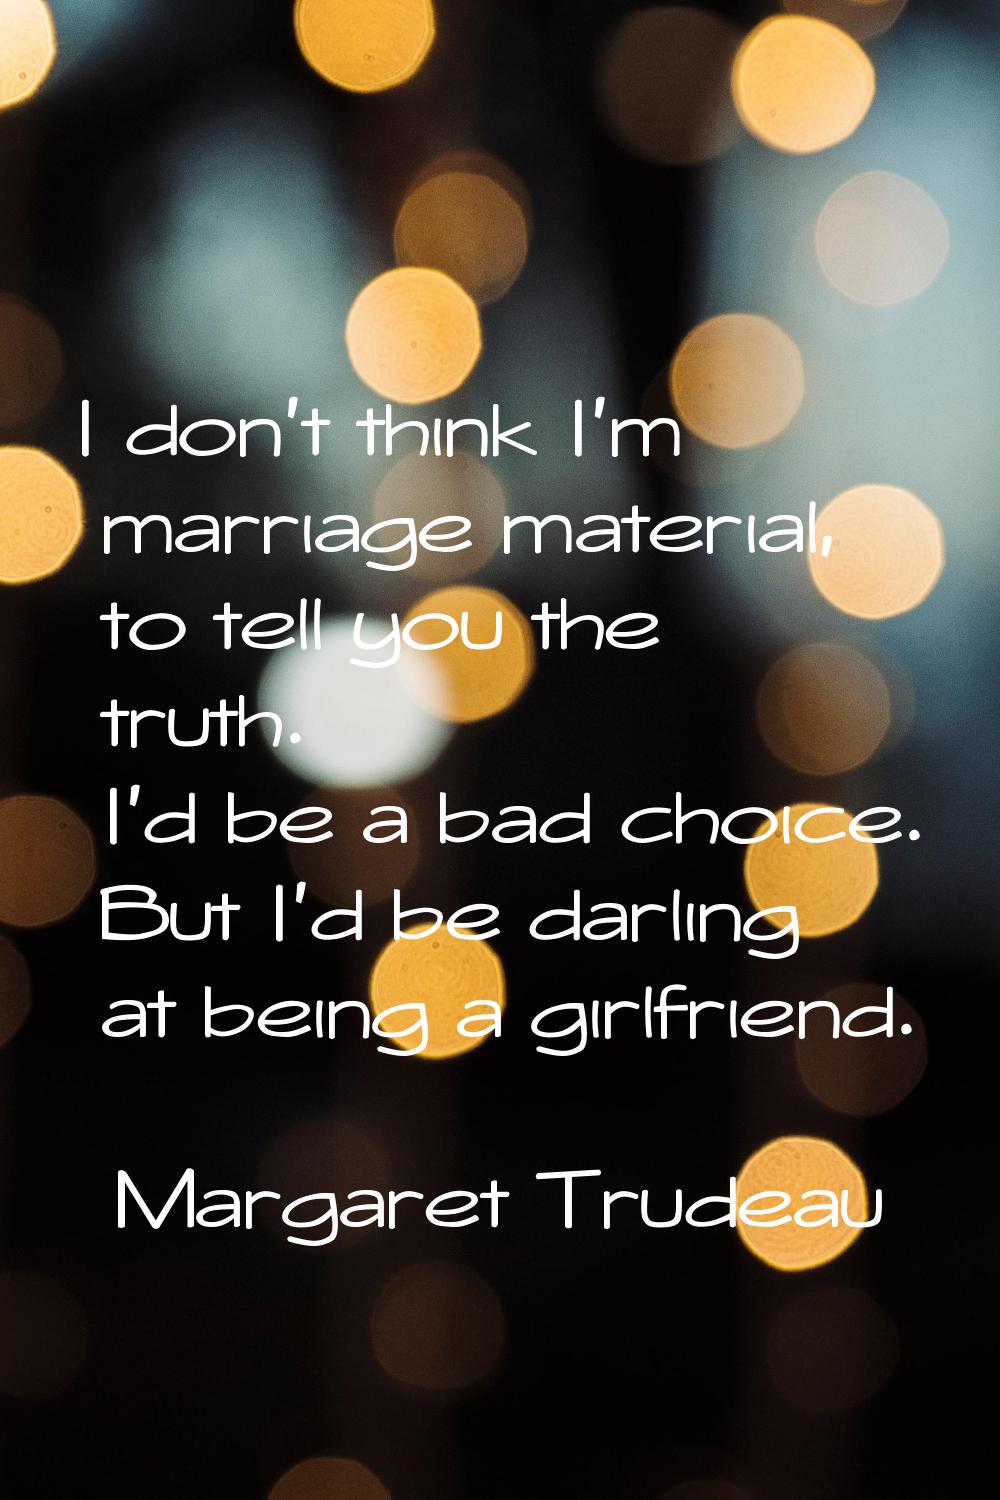 I don't think I'm marriage material, to tell you the truth. I'd be a bad choice. But I'd be darling